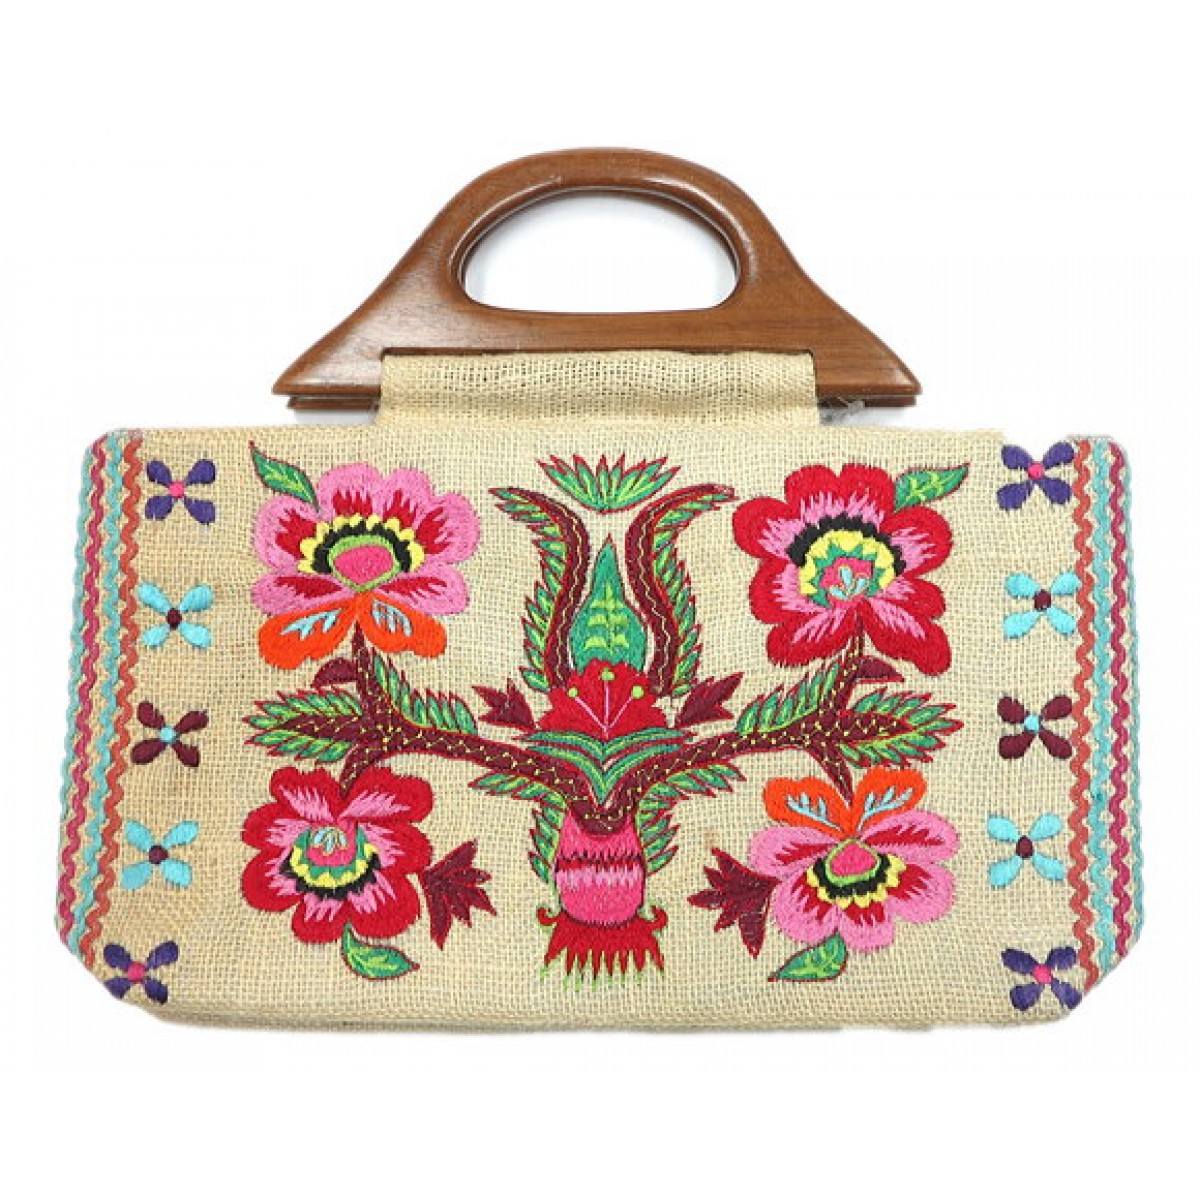 Tote with Floral Embroidered